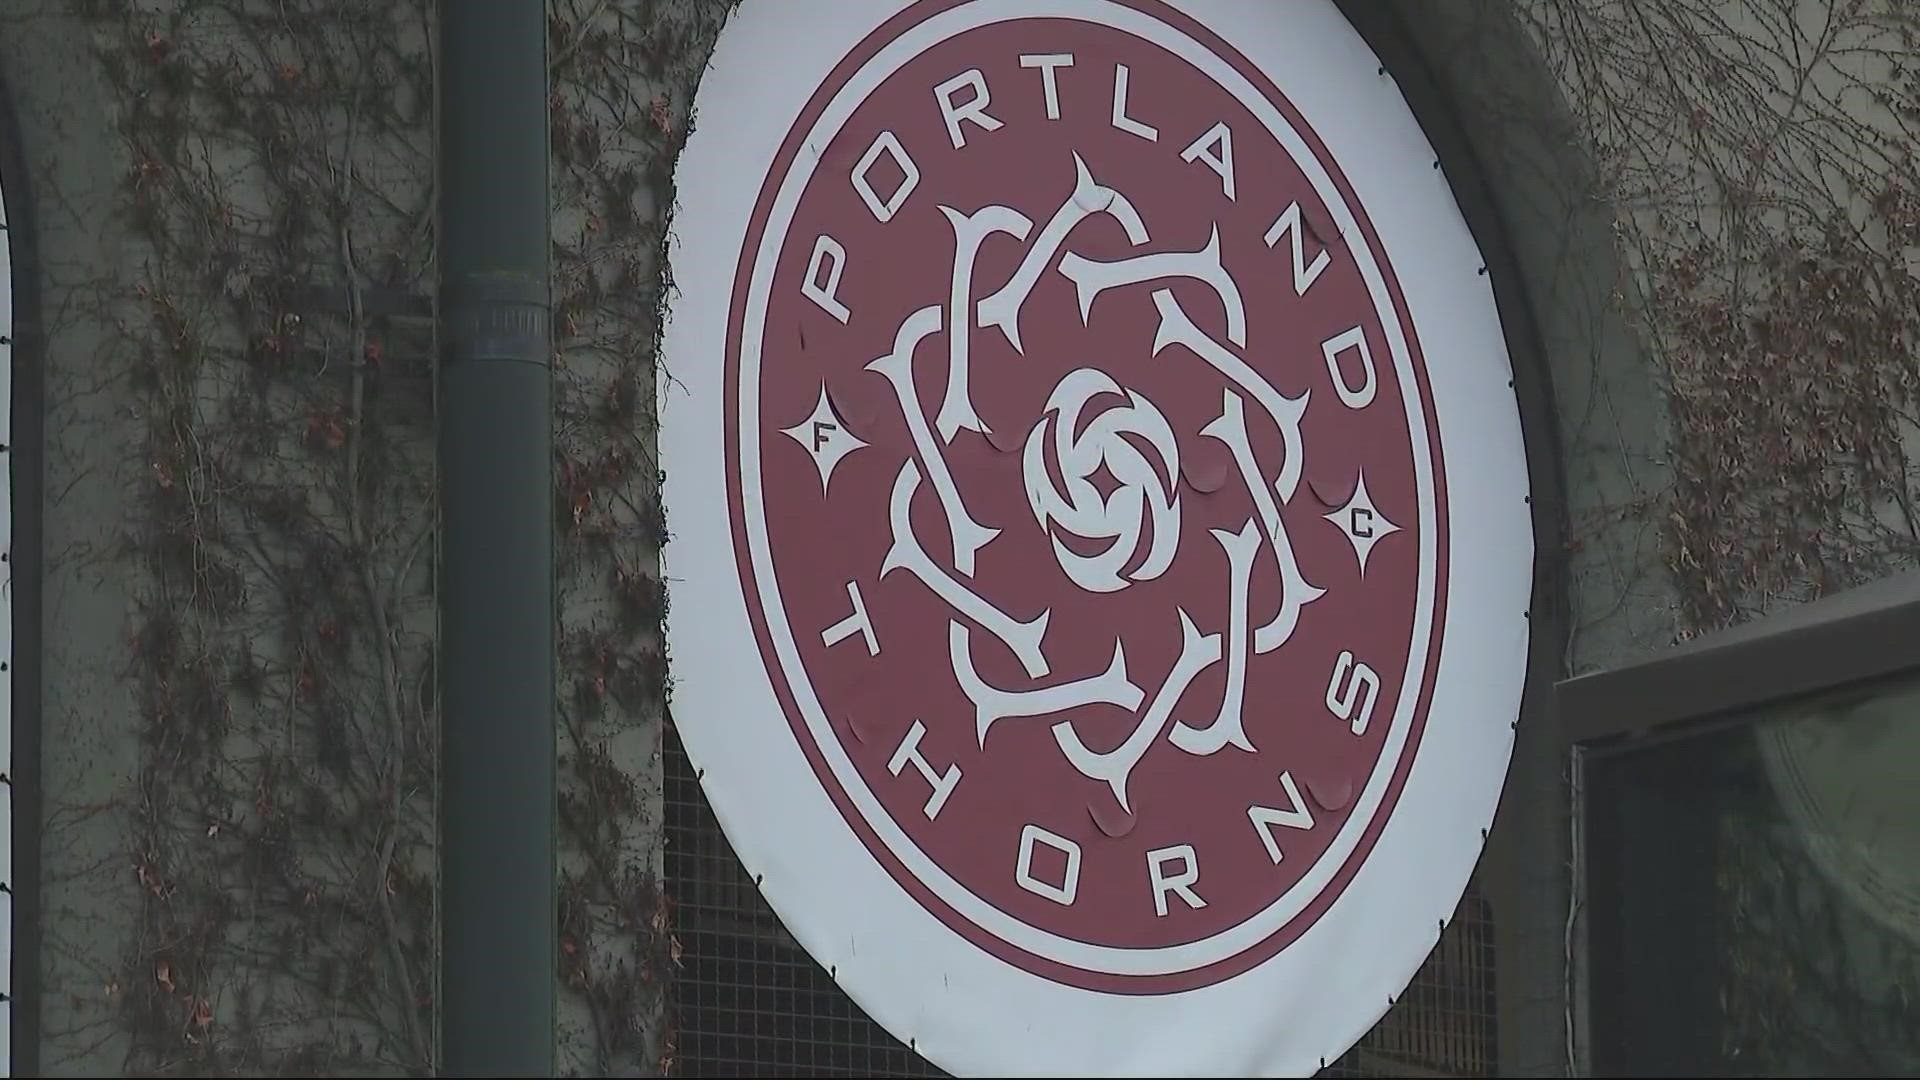 The two unrelated cases join a series of personnel shakeups at Thorns FC. A months-long NWSL investigation revealed a culture of abuse at the club.